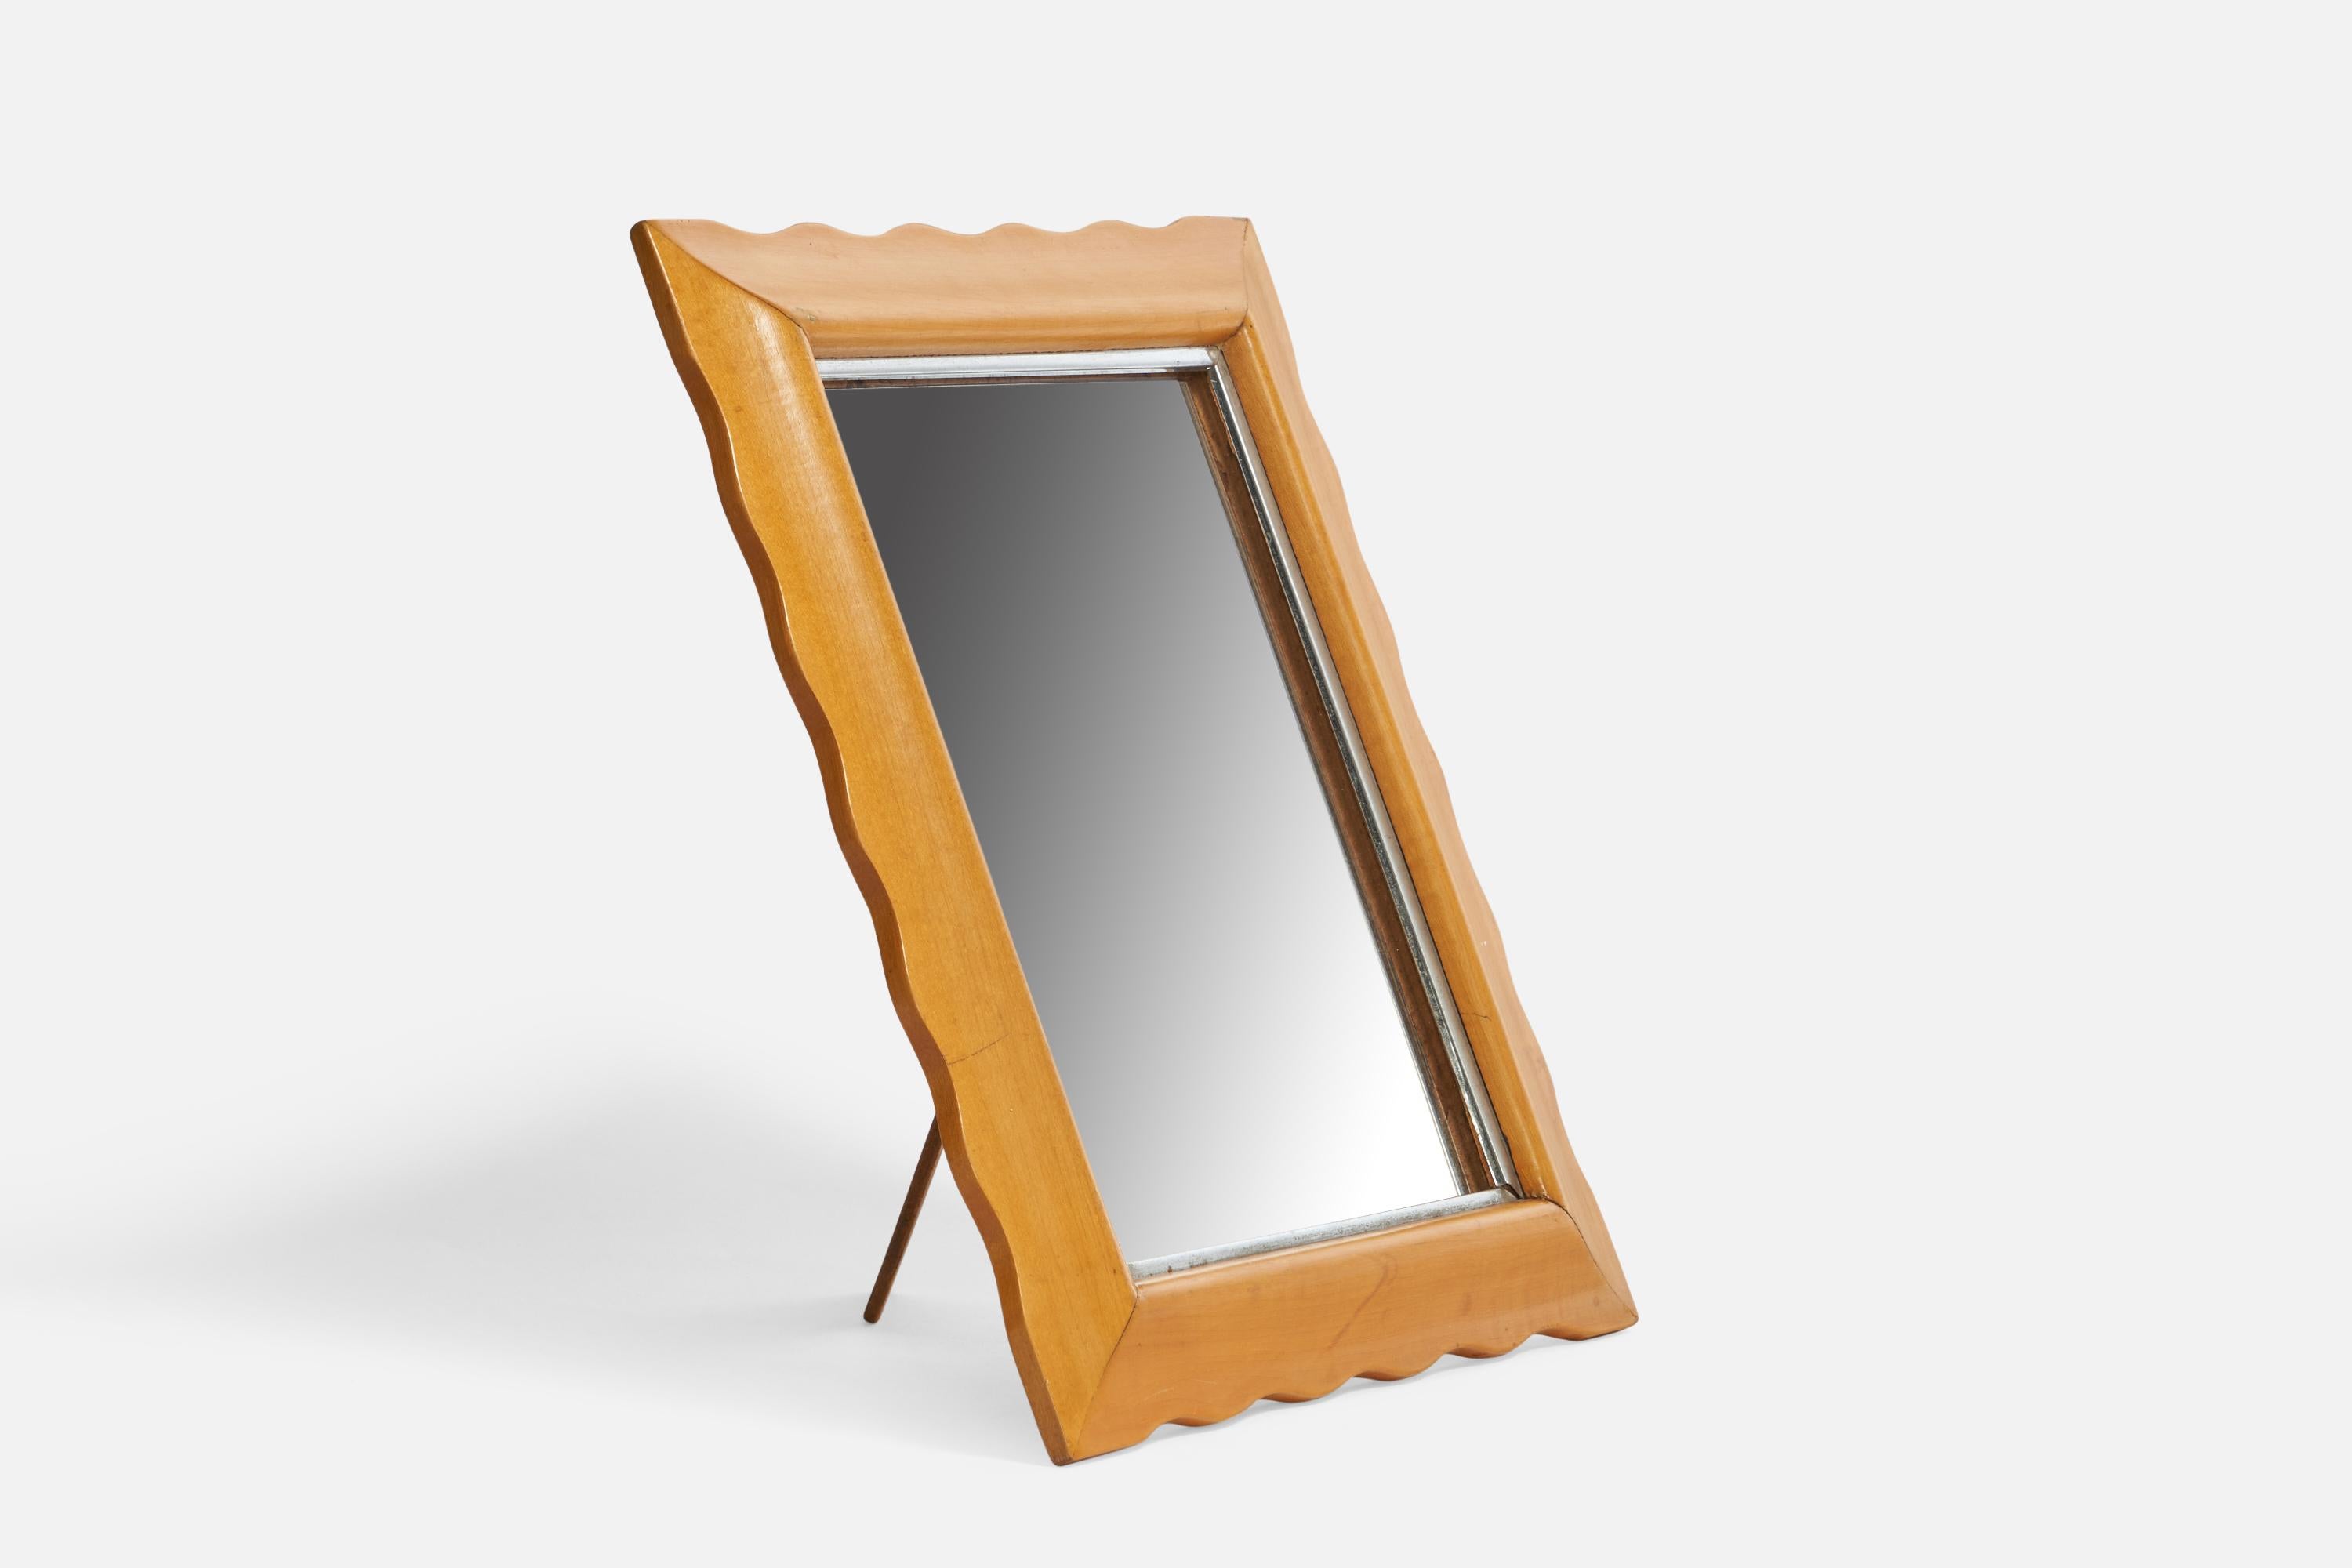 A wood and aluminium table or wall mirror designed and produced in Italy, 1940s.